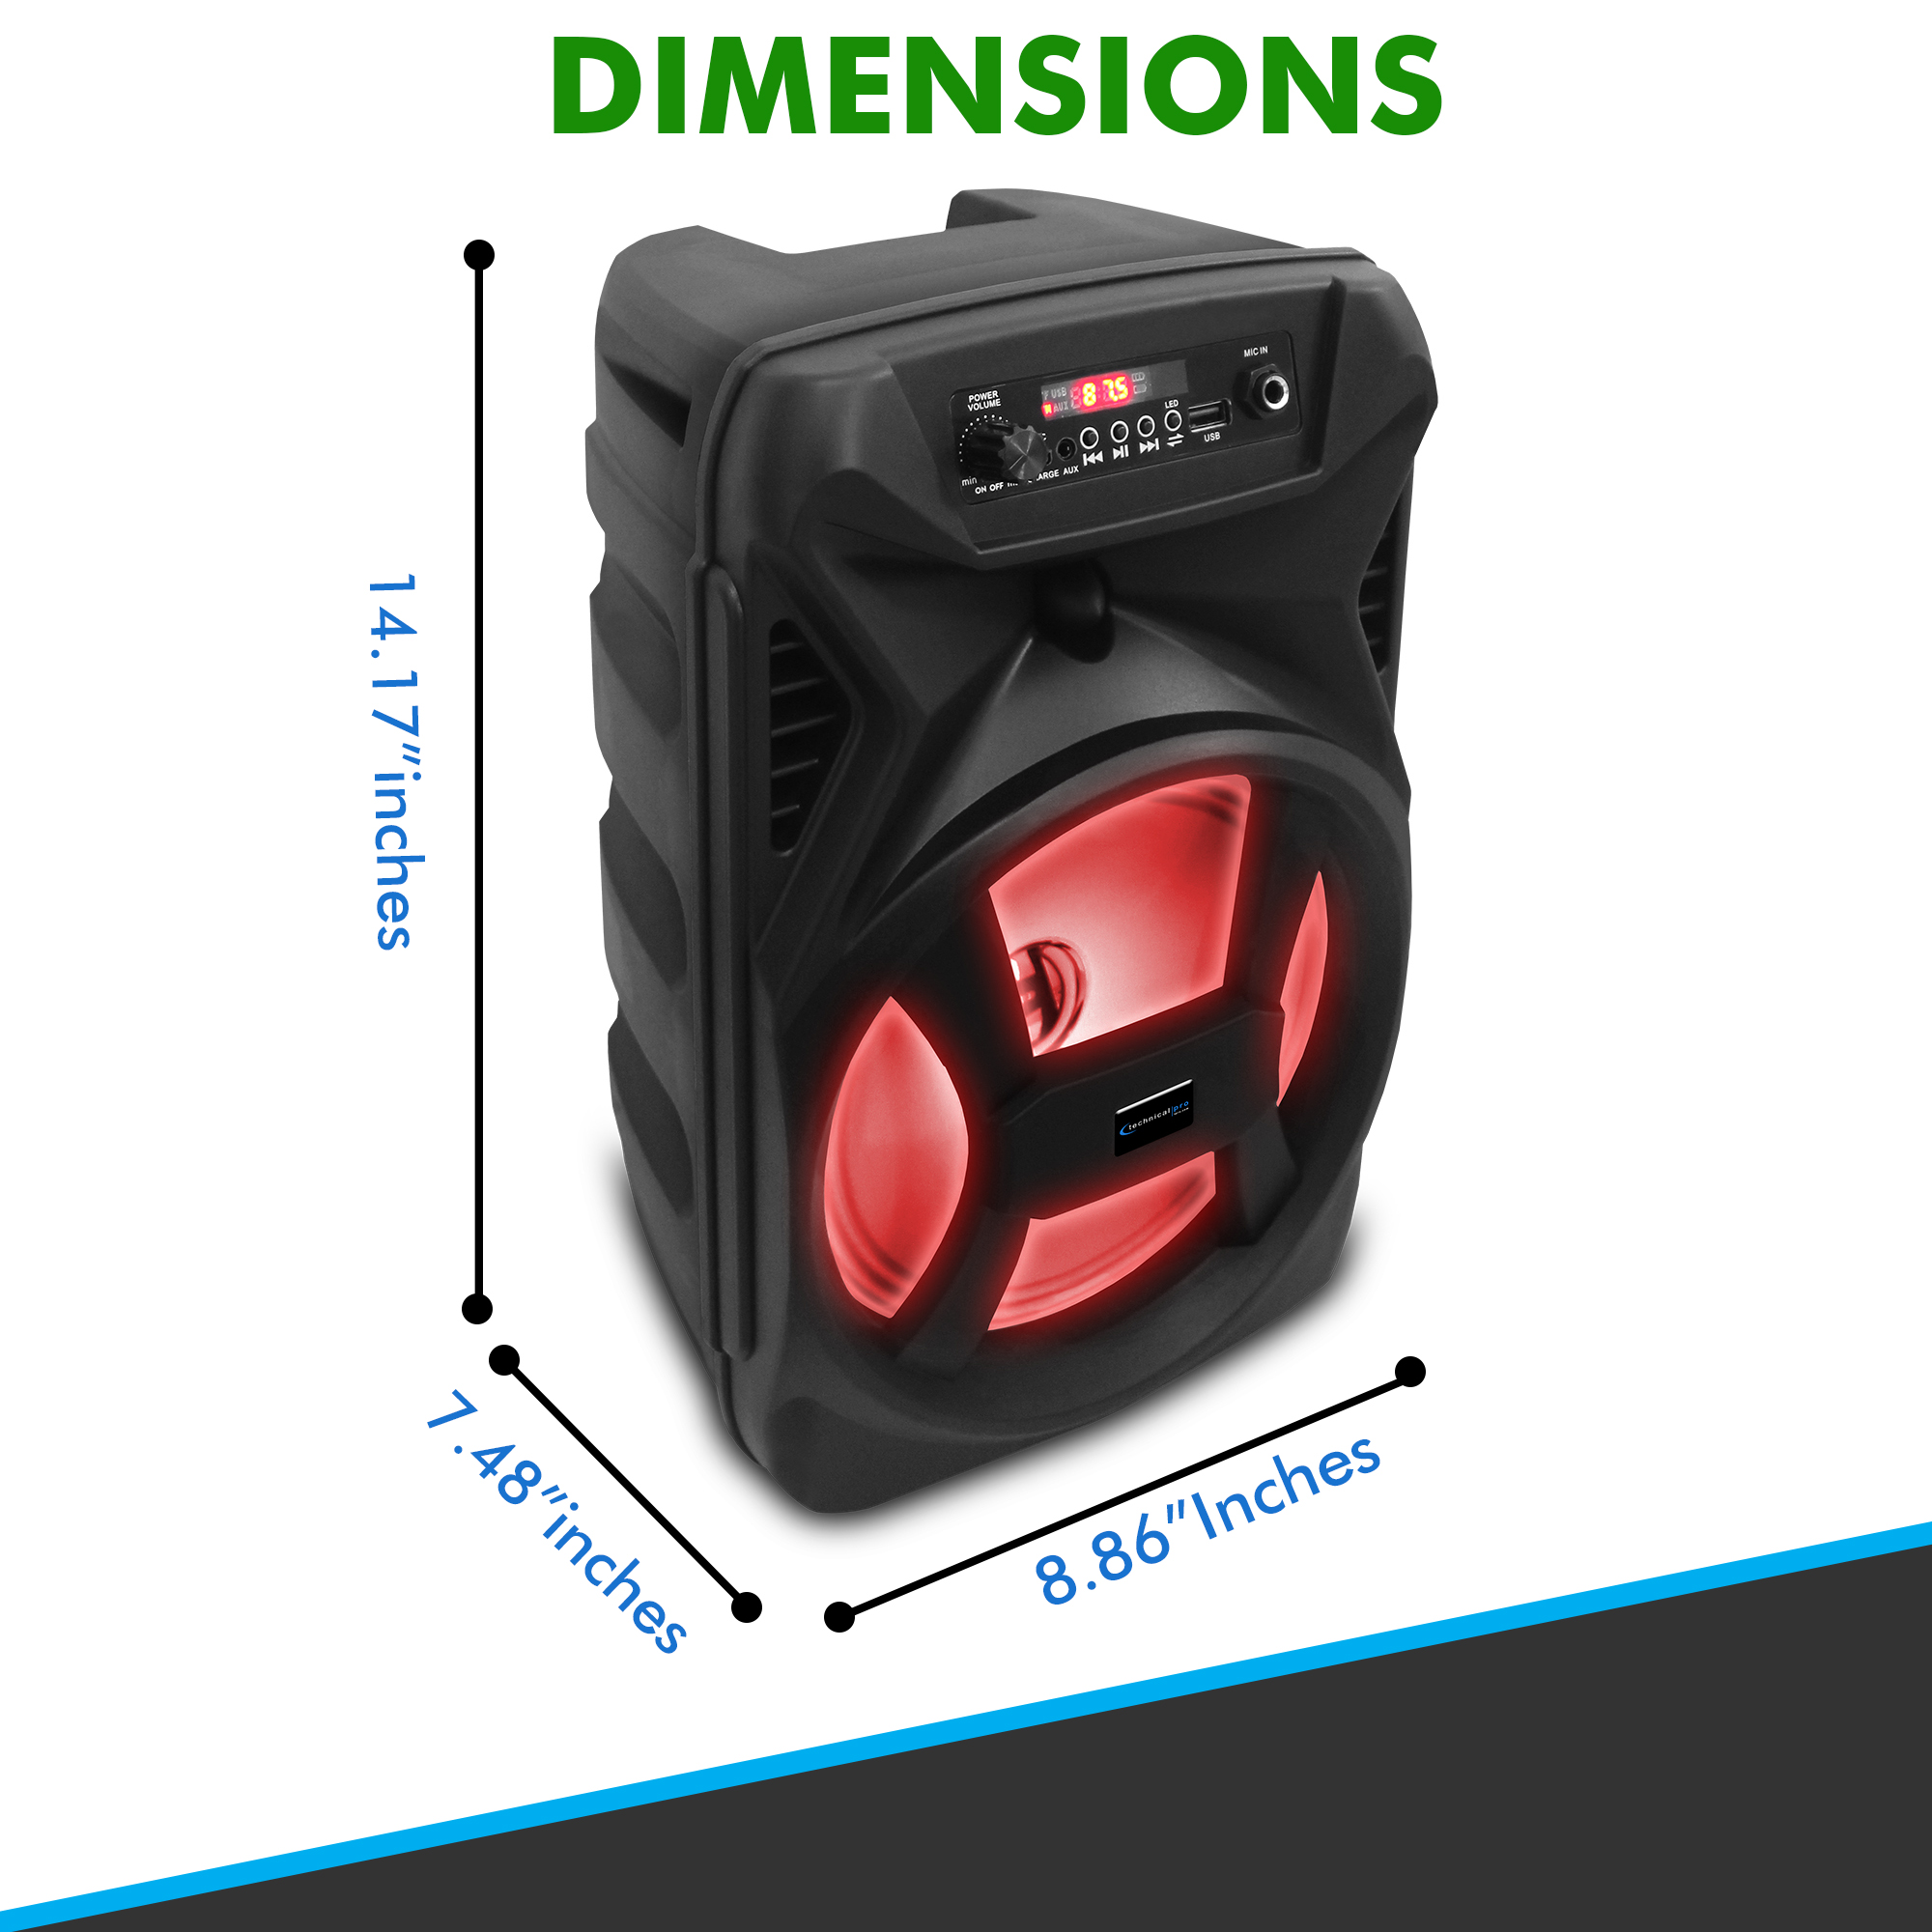 Technical Pro 8" Portable 500 Watts Bluetooth Speaker w/ Woofer and Tweeter, Festival PA LED Speaker, USB Card Input, - image 3 of 7